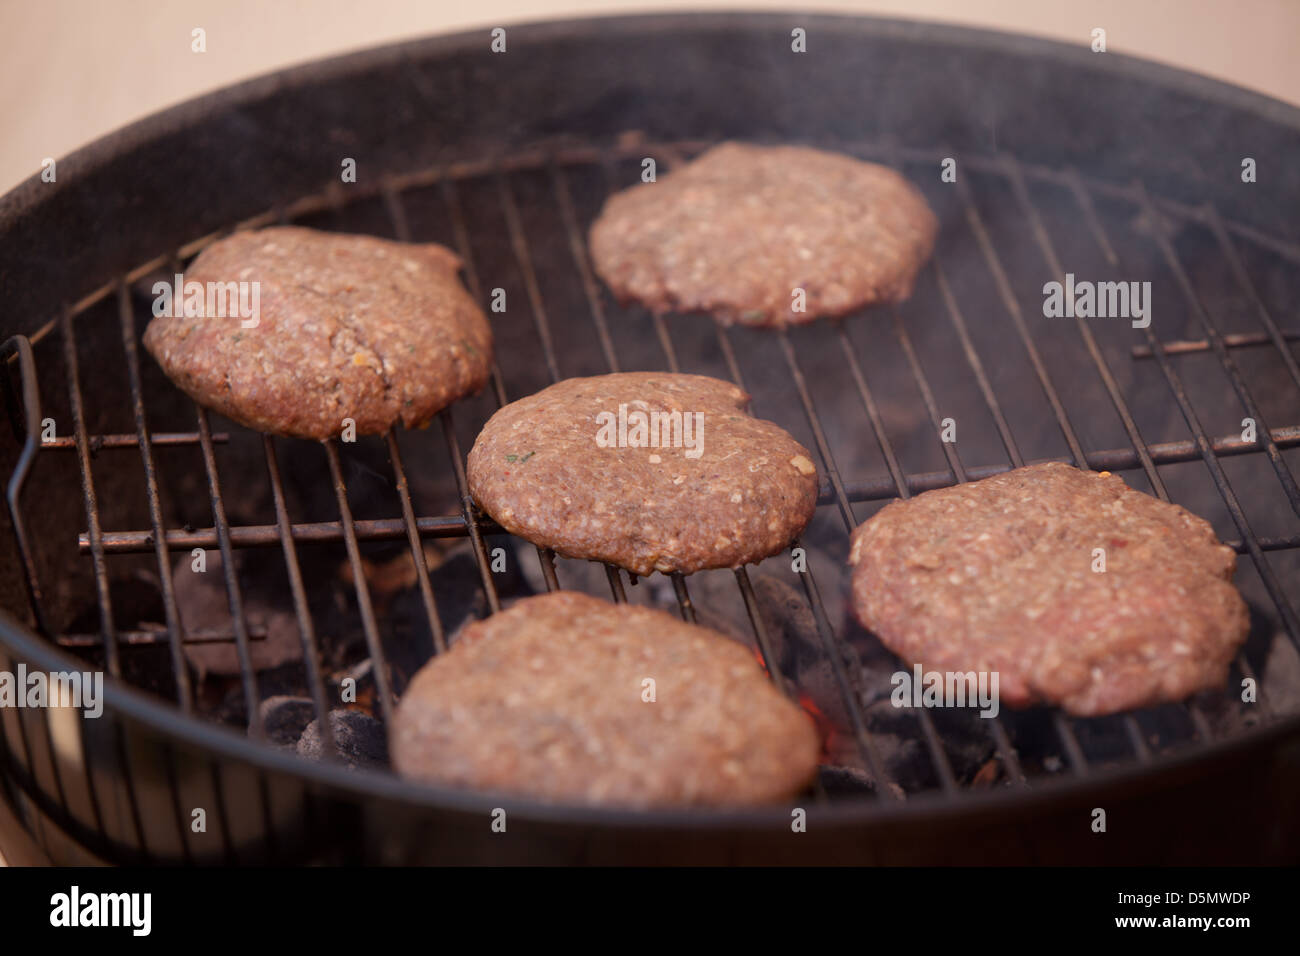 BBQ,grill,beef,ham burger,meat,lean,none-fatty,spring,summer,fun,gathering,football,cook out,mushroom-burgers,natural,vegan,flam Stock Photo